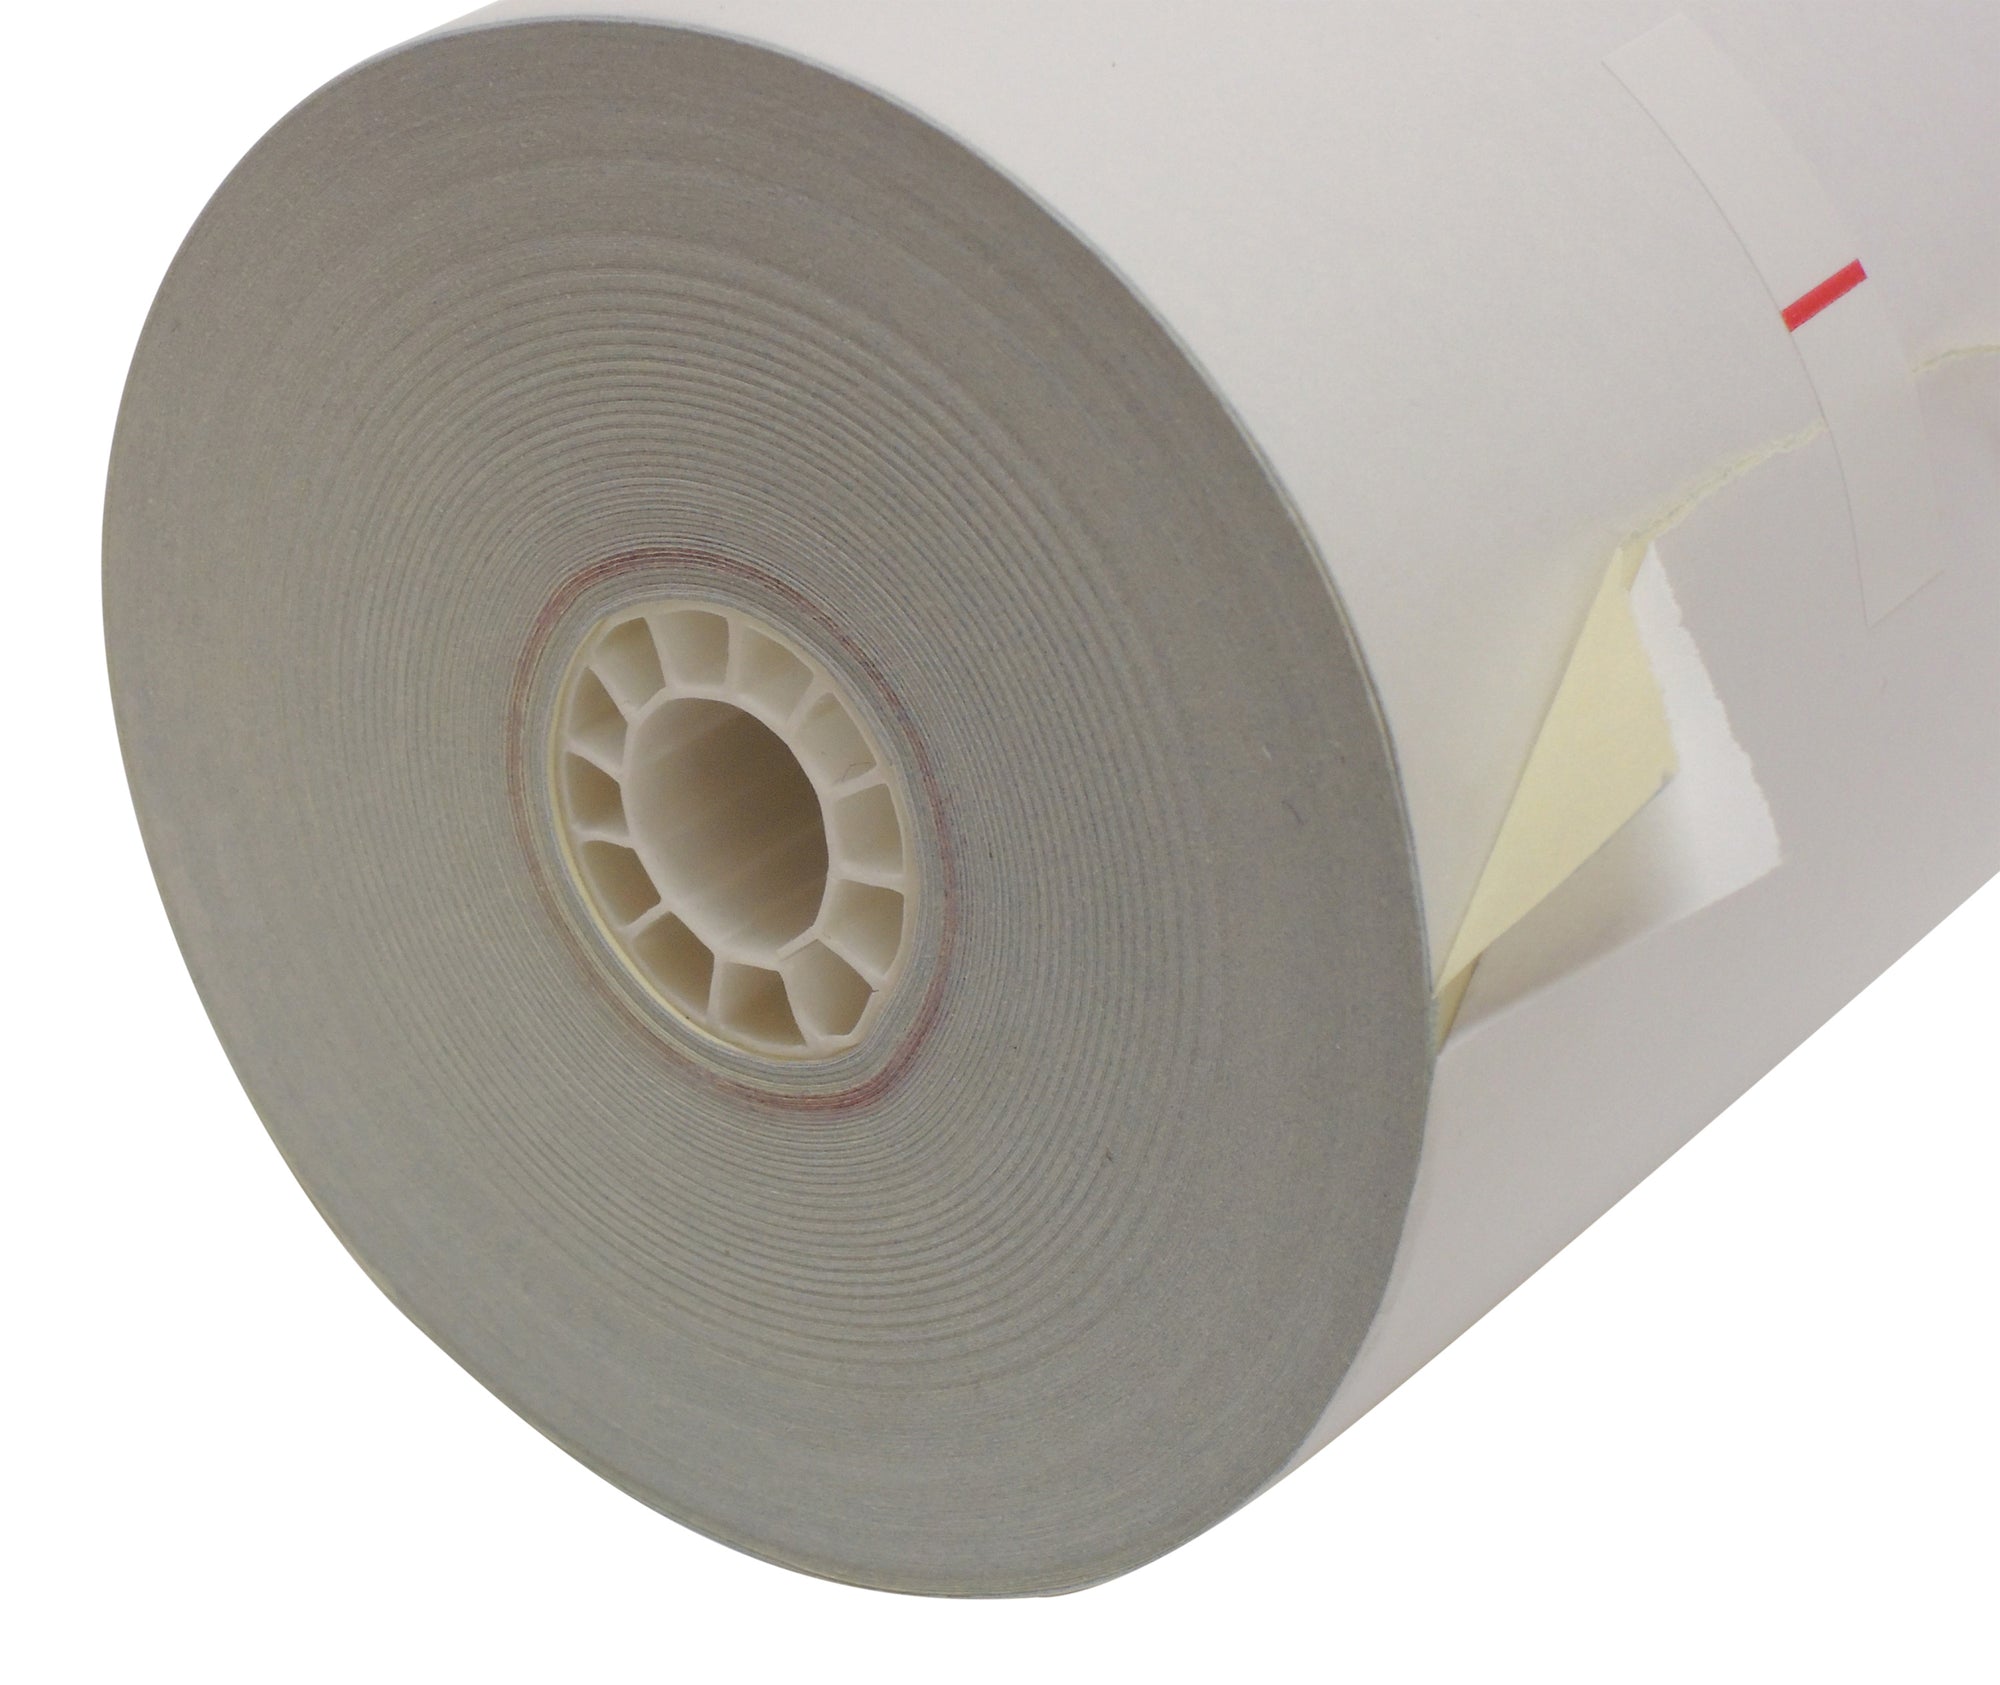 2 Ply Bond 3 x 90 ft white/canary carbonless 50 rolls